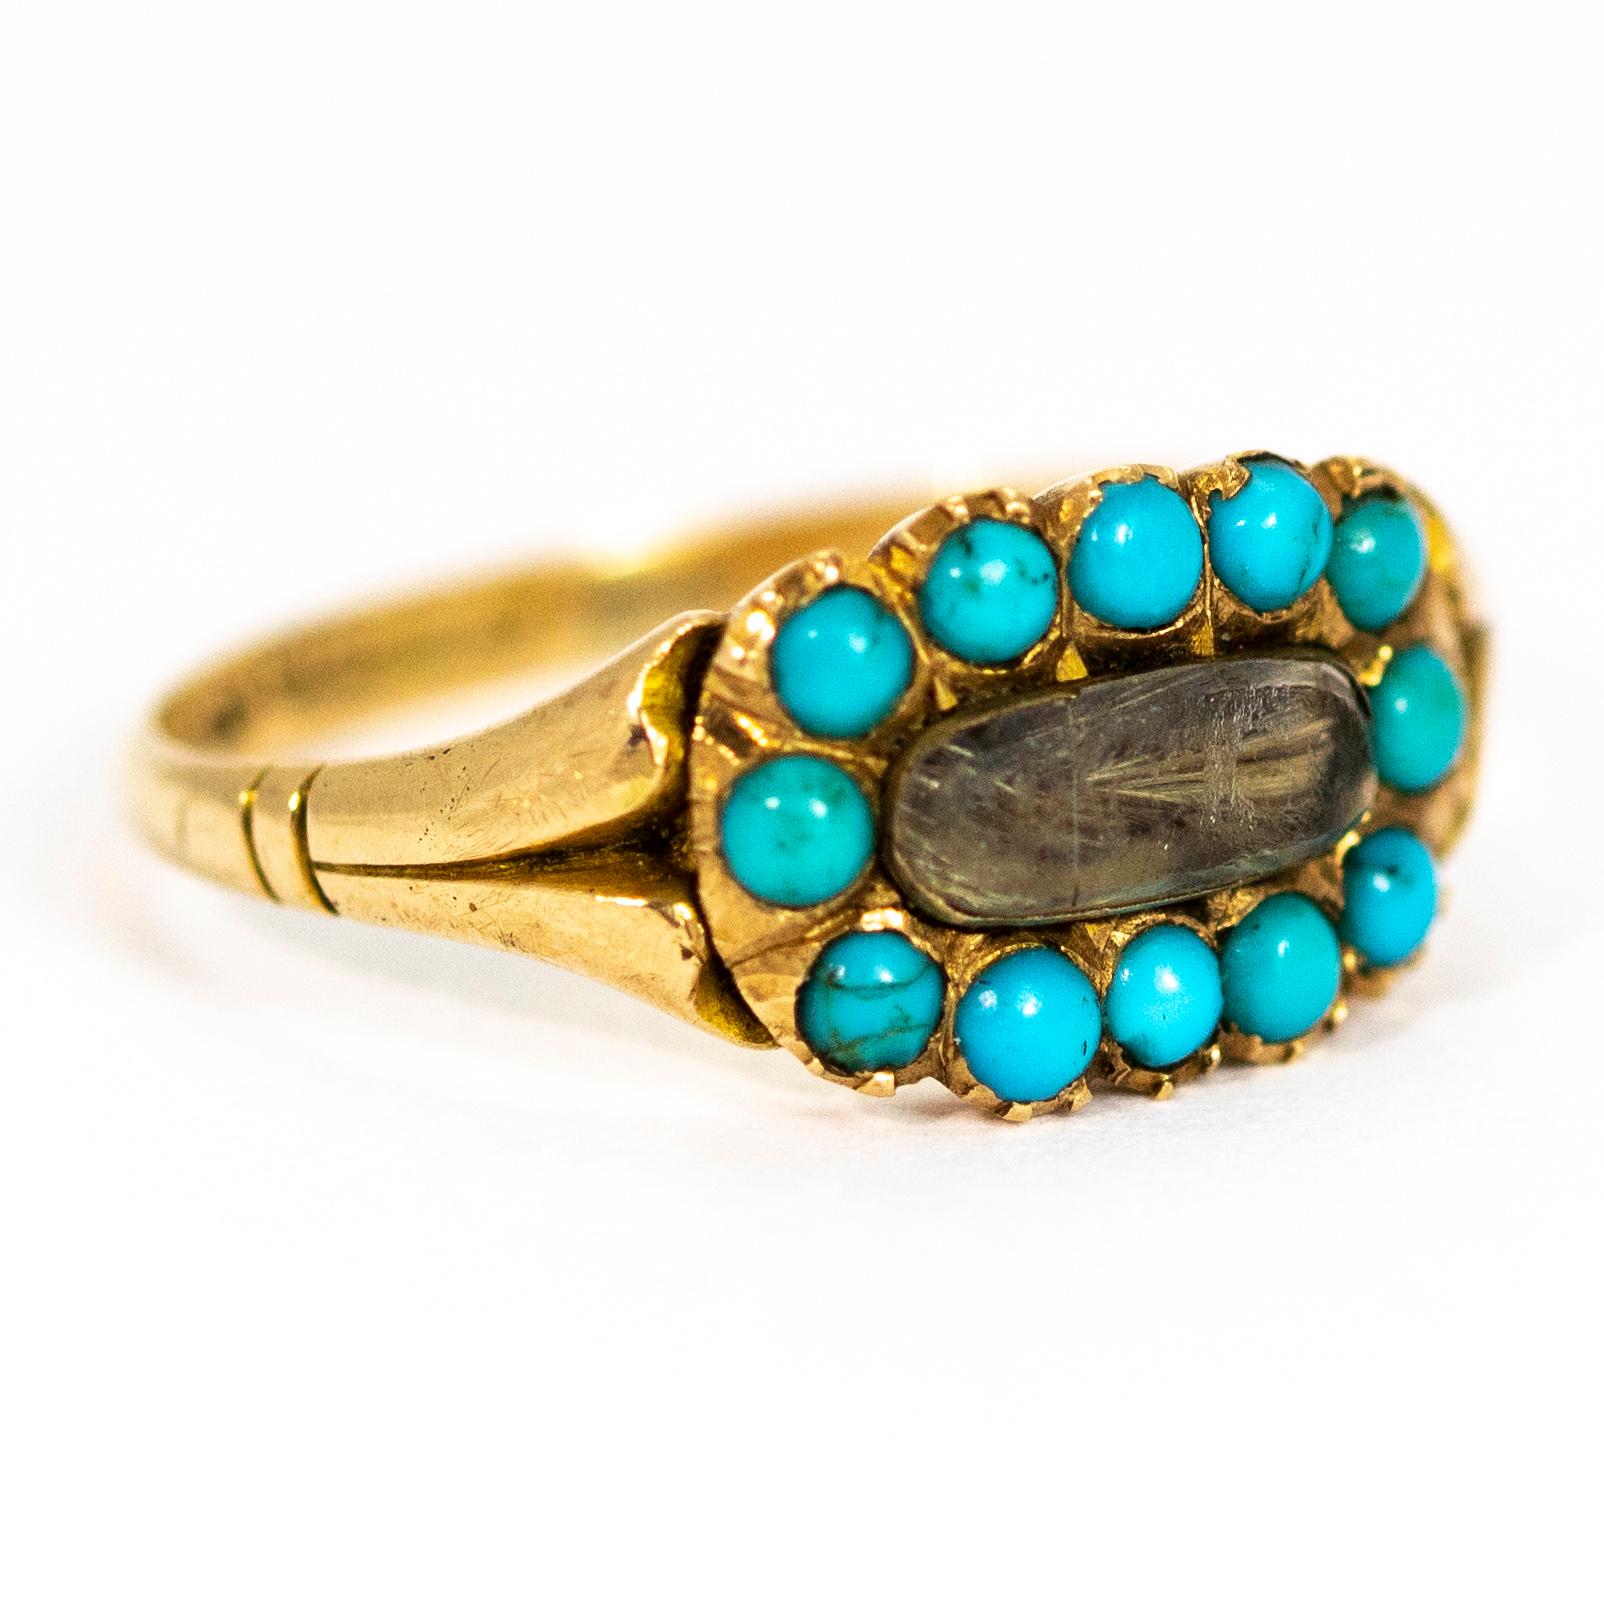 Women's or Men's Victorian 15 Carat Gold Turquoise Mourning Ring